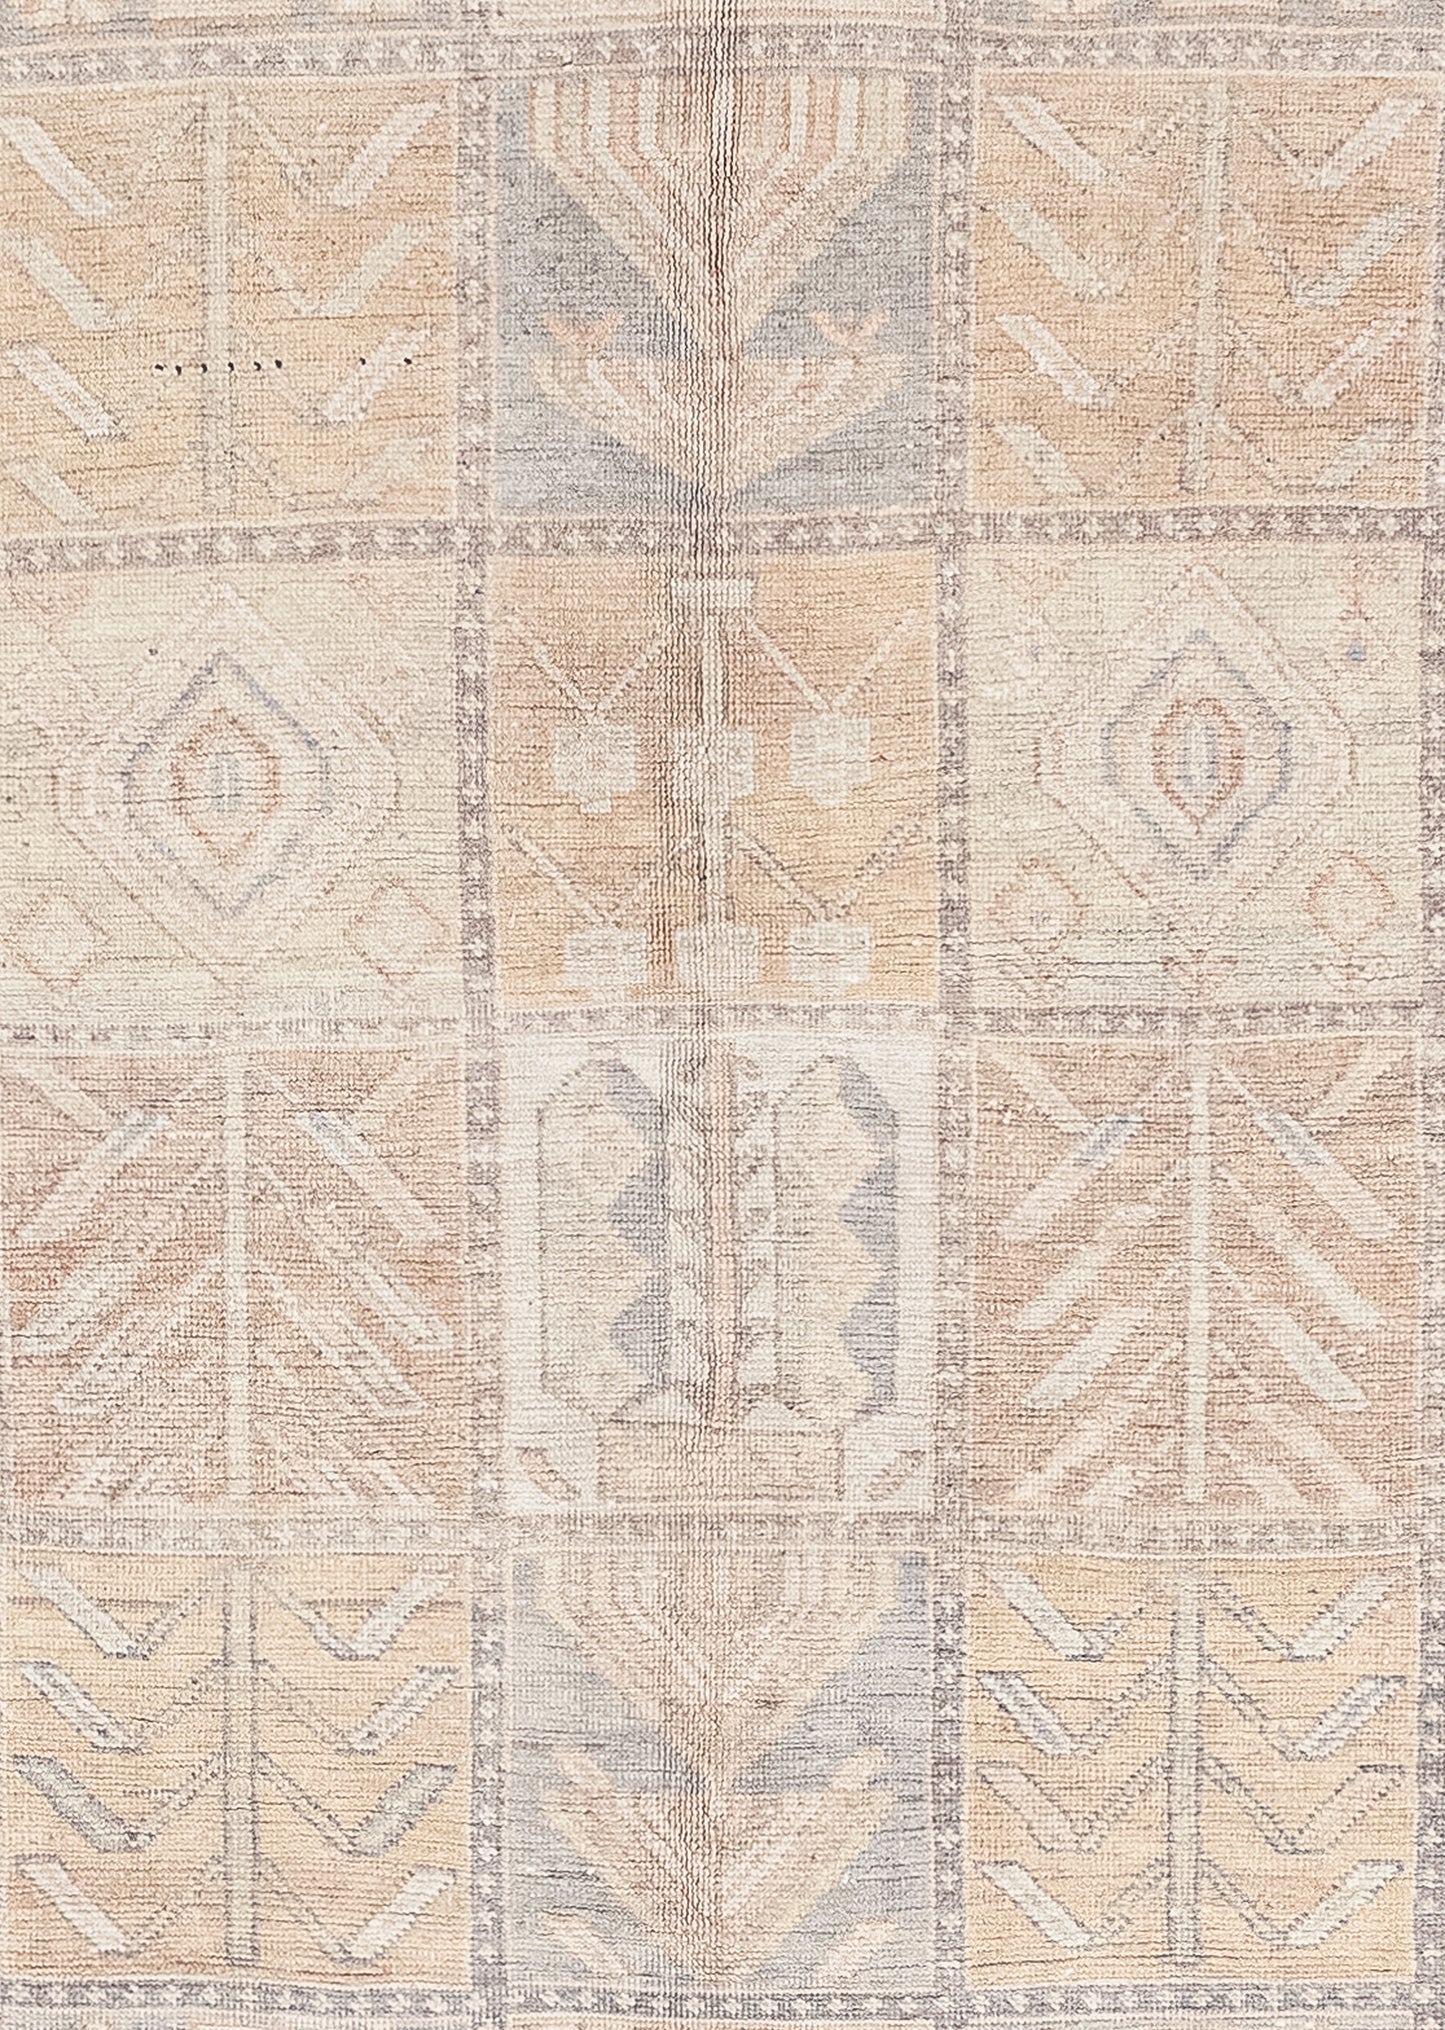 The center of the rug features a 5 x 8 grid that has a total of 40 squares with 10 different designs that are wheat plants, inverted pyramids, lined diamonds, cactus, and tribal.